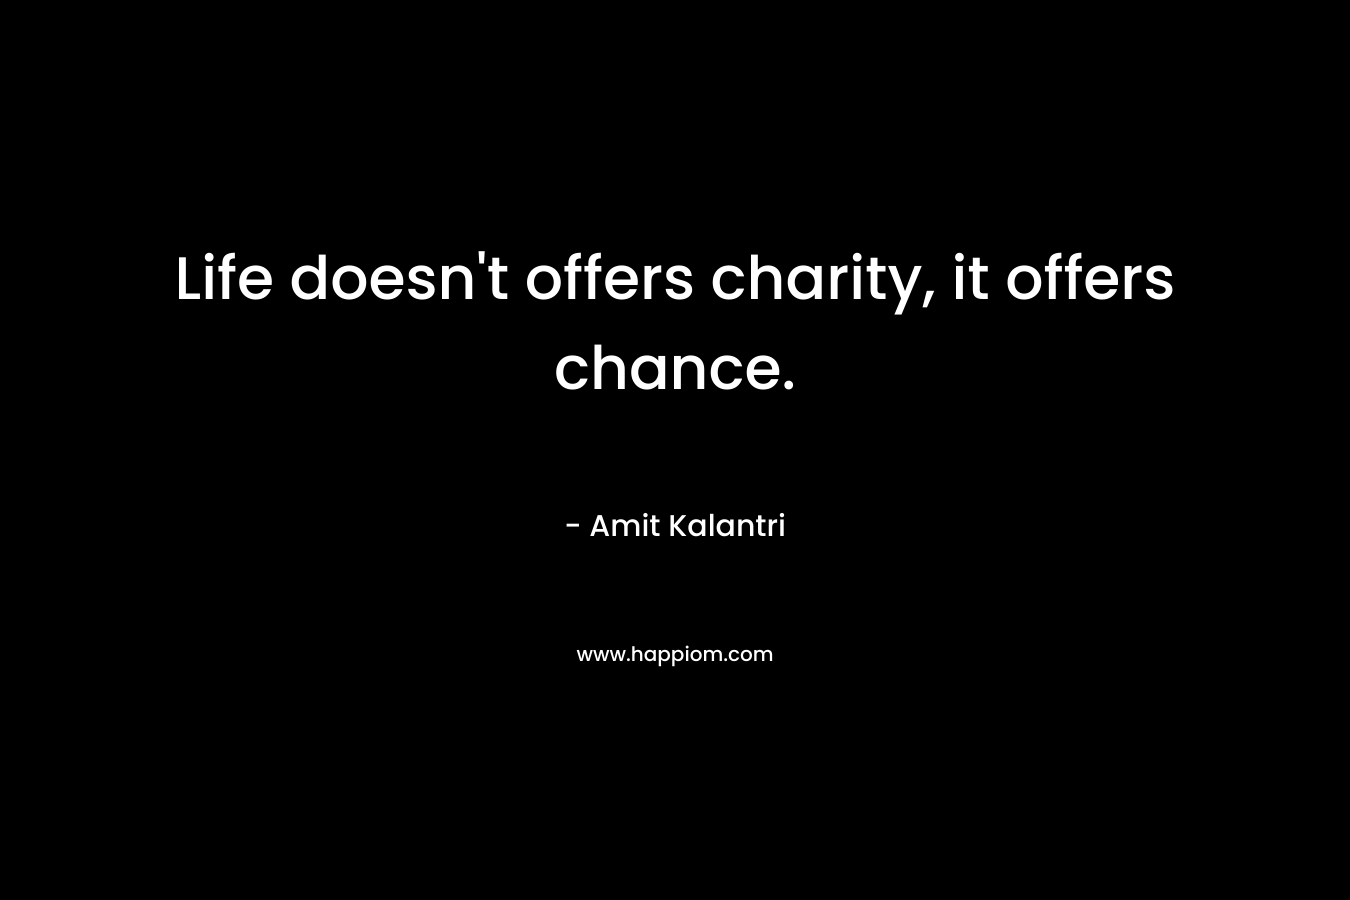 Life doesn’t offers charity, it offers chance. – Amit Kalantri